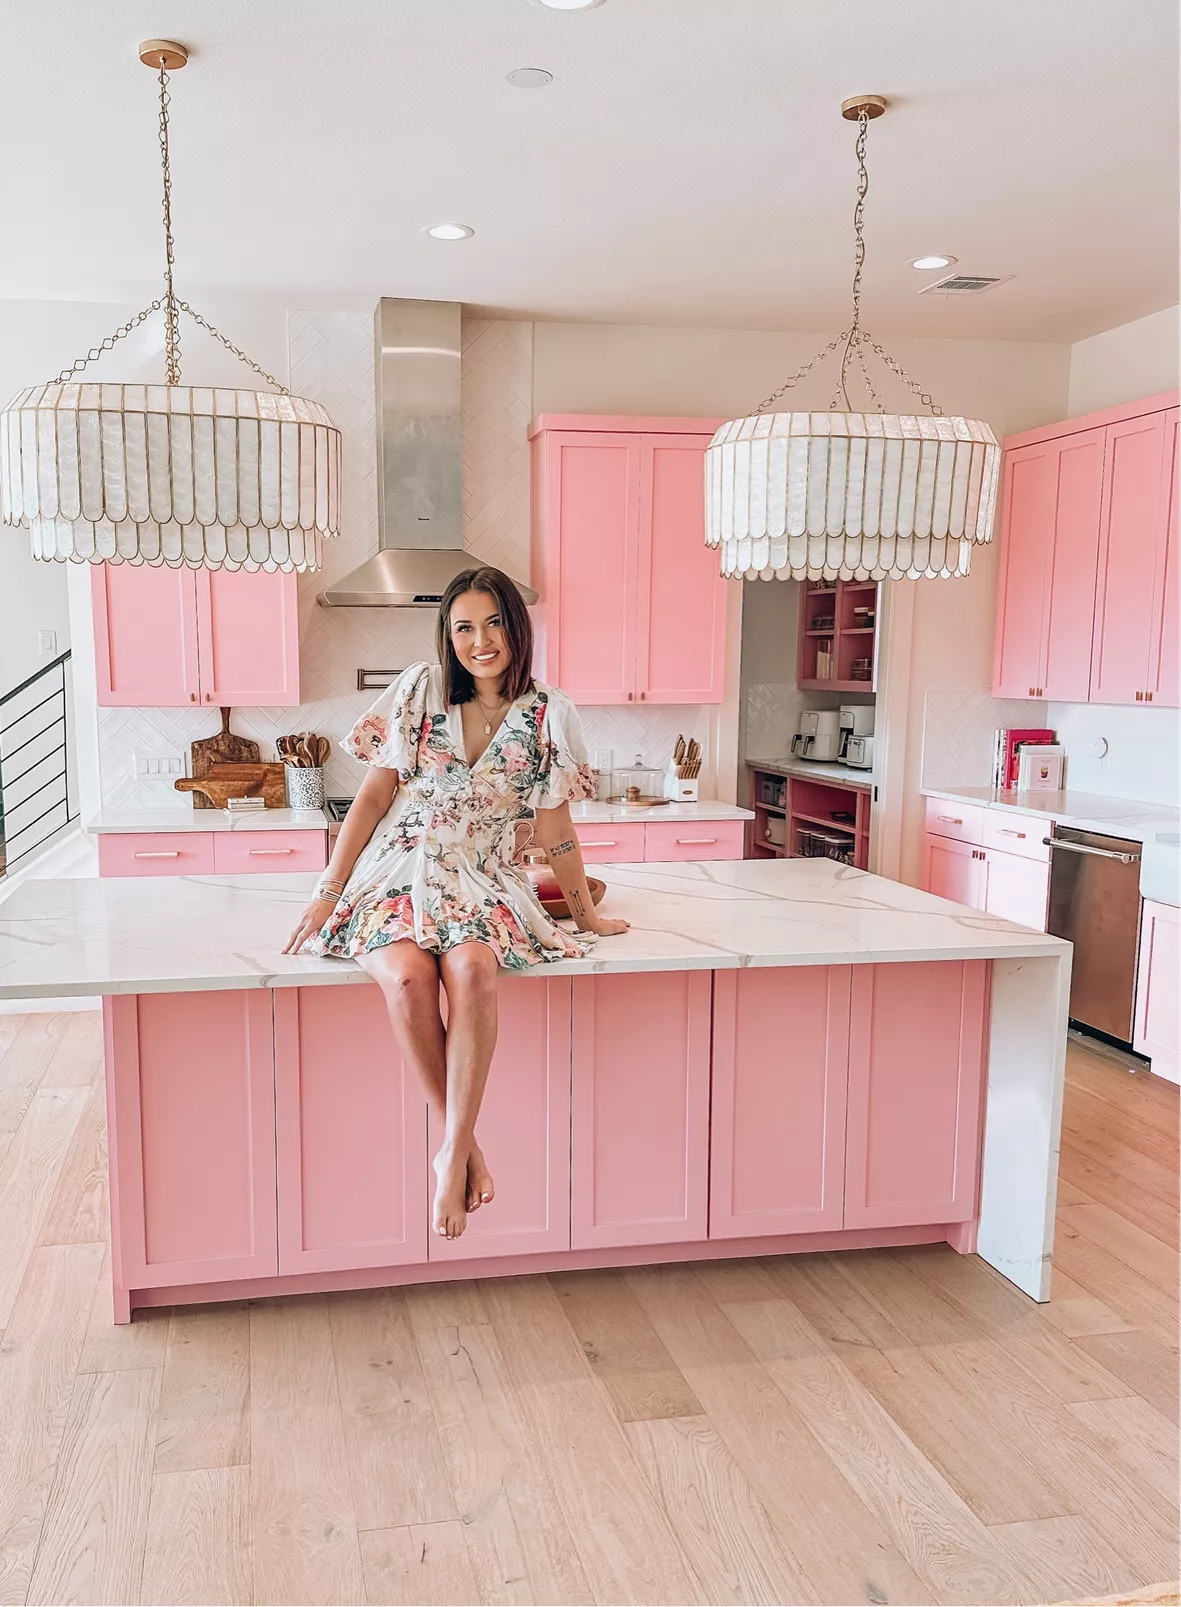 Woman praised for painting her kitchen appliances pink